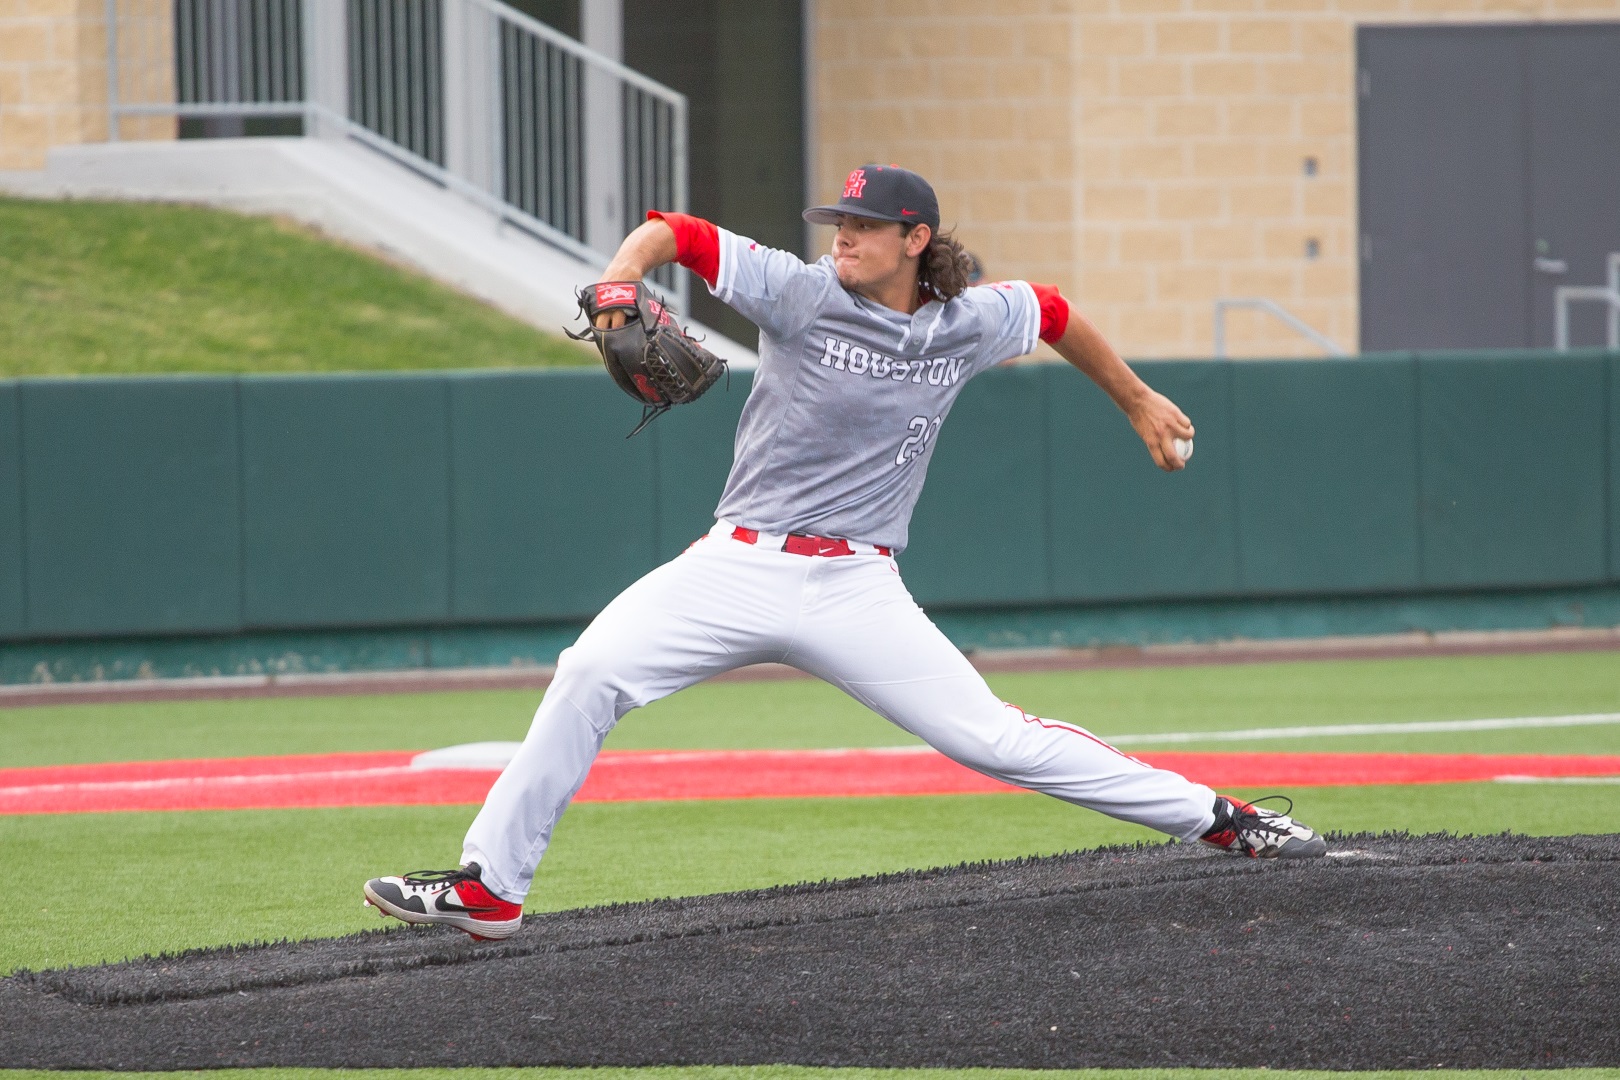 Junior Clay Aguilar, one of Houston's preseason all-conference pitchers, said many of the Cougars' returners took 2019's NCAA Tournament snub "pretty hard," working hard in the offseason to make sure UH makes it in 2020. | Trevor Nolley/The Cougar